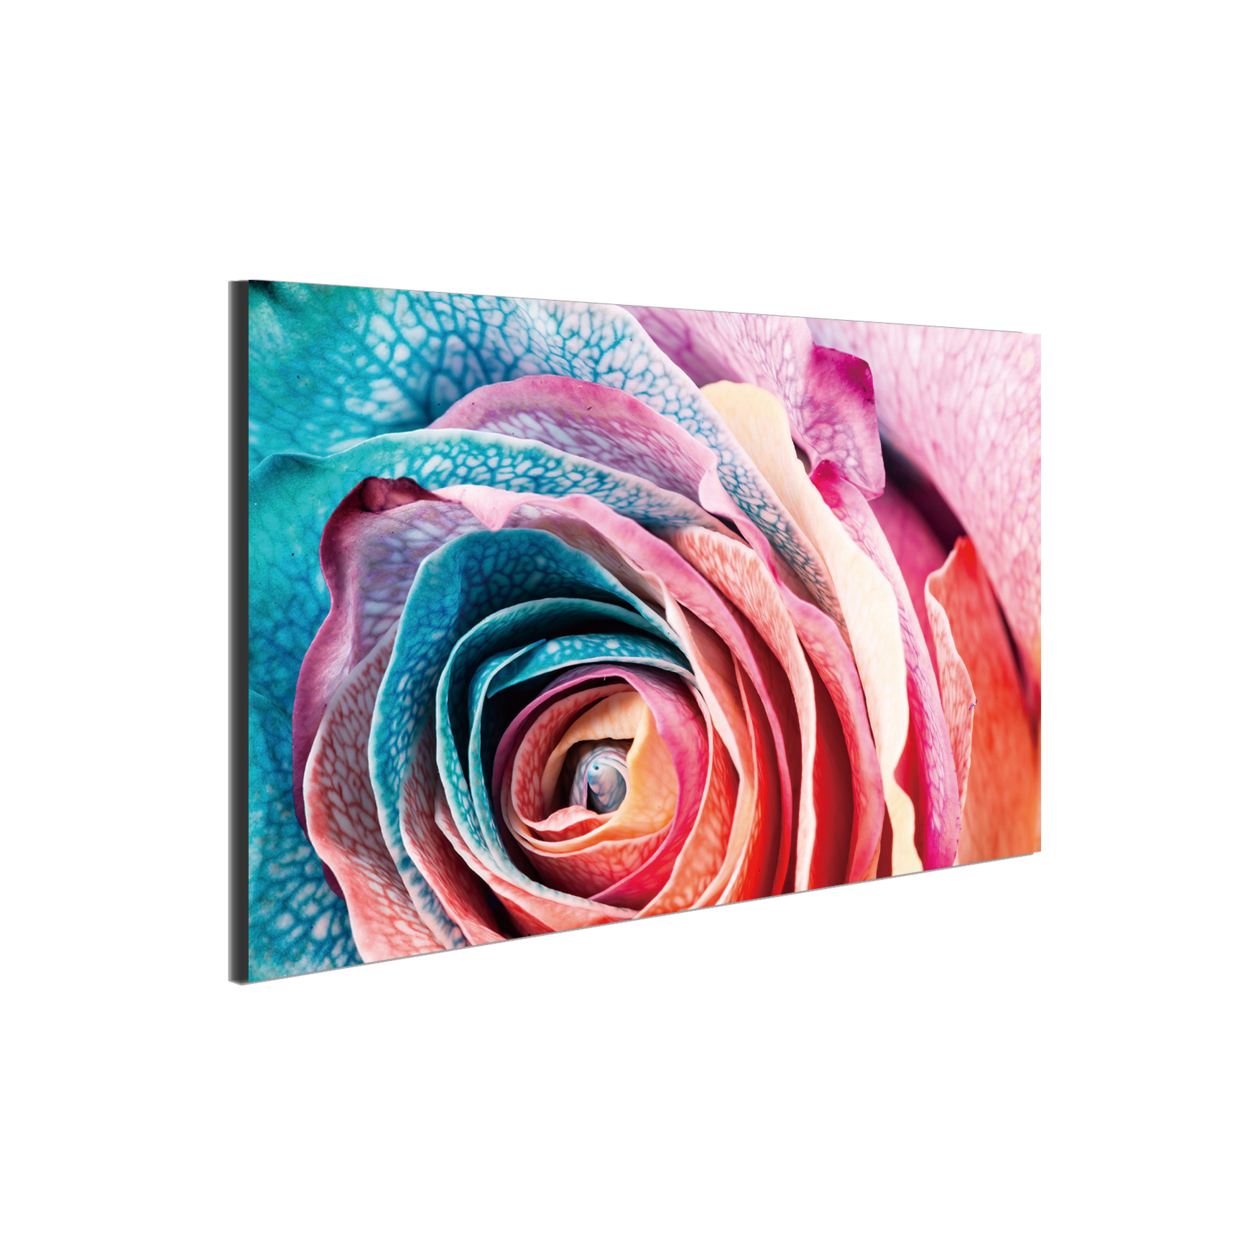 Rosalia Wrapped Canvas Wall Art Print 47x31.5 Inches